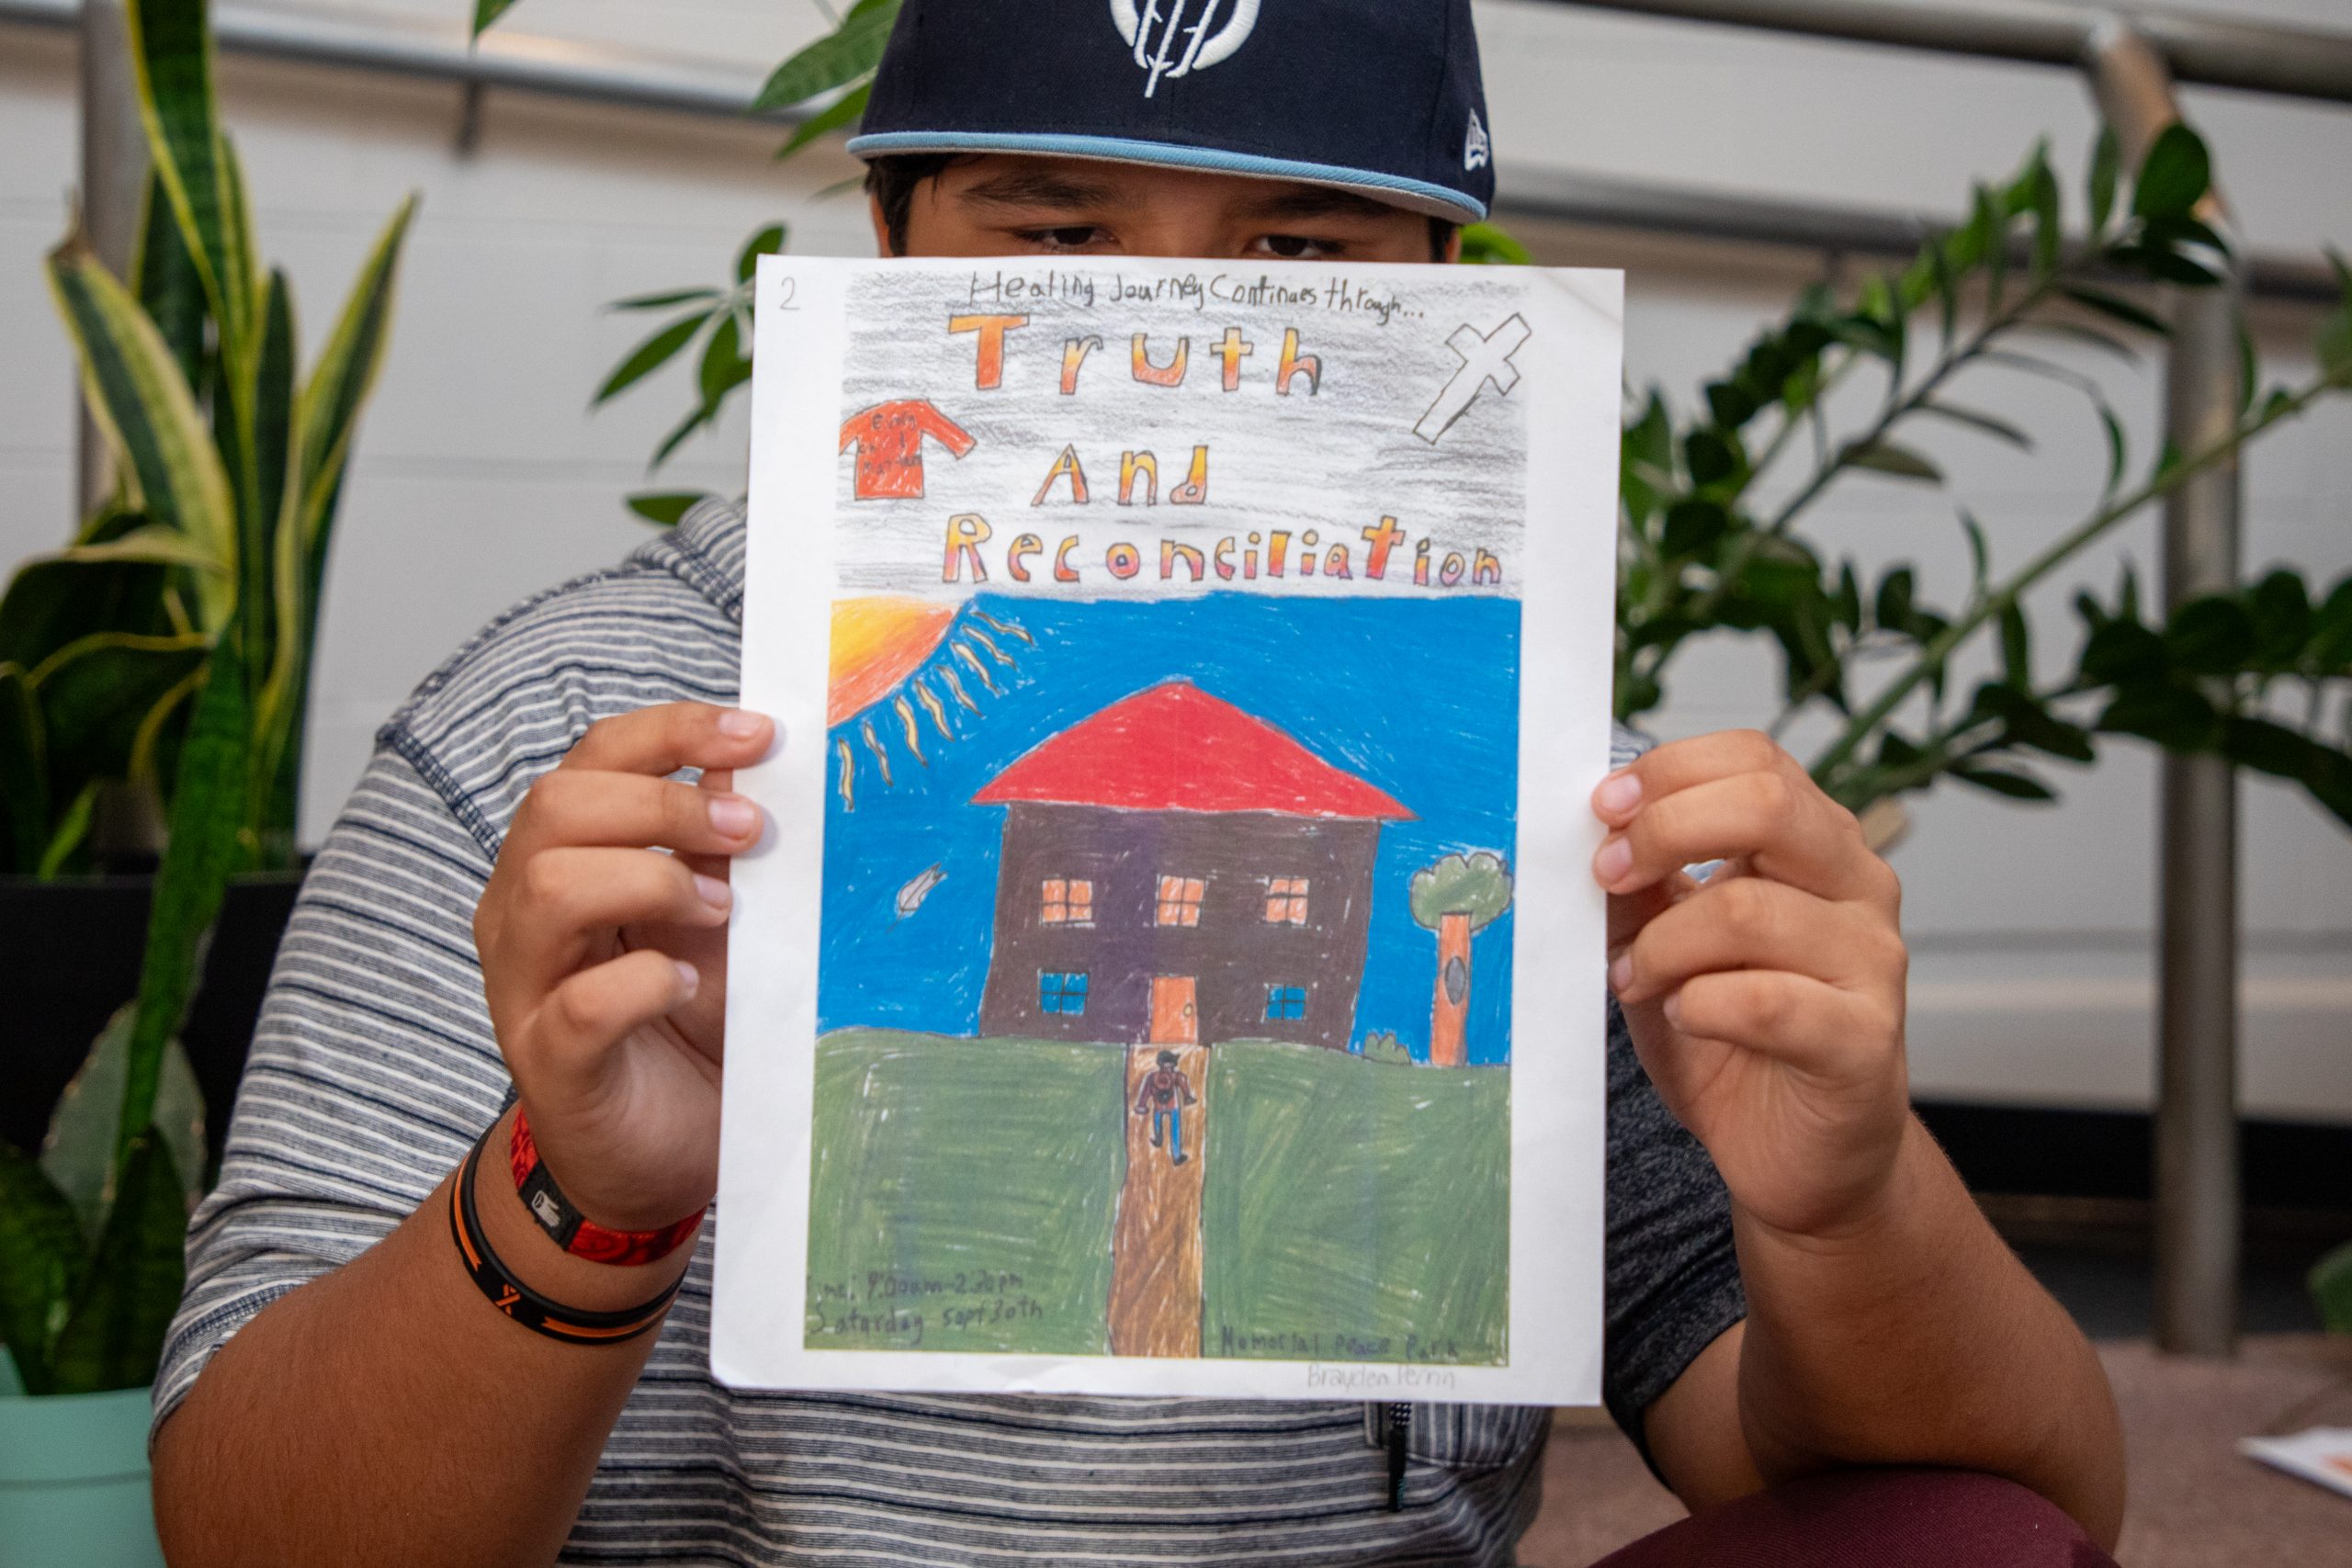 Grade 7 student Brayden holds up his poster for the National Day for Truth and Reconciliation.